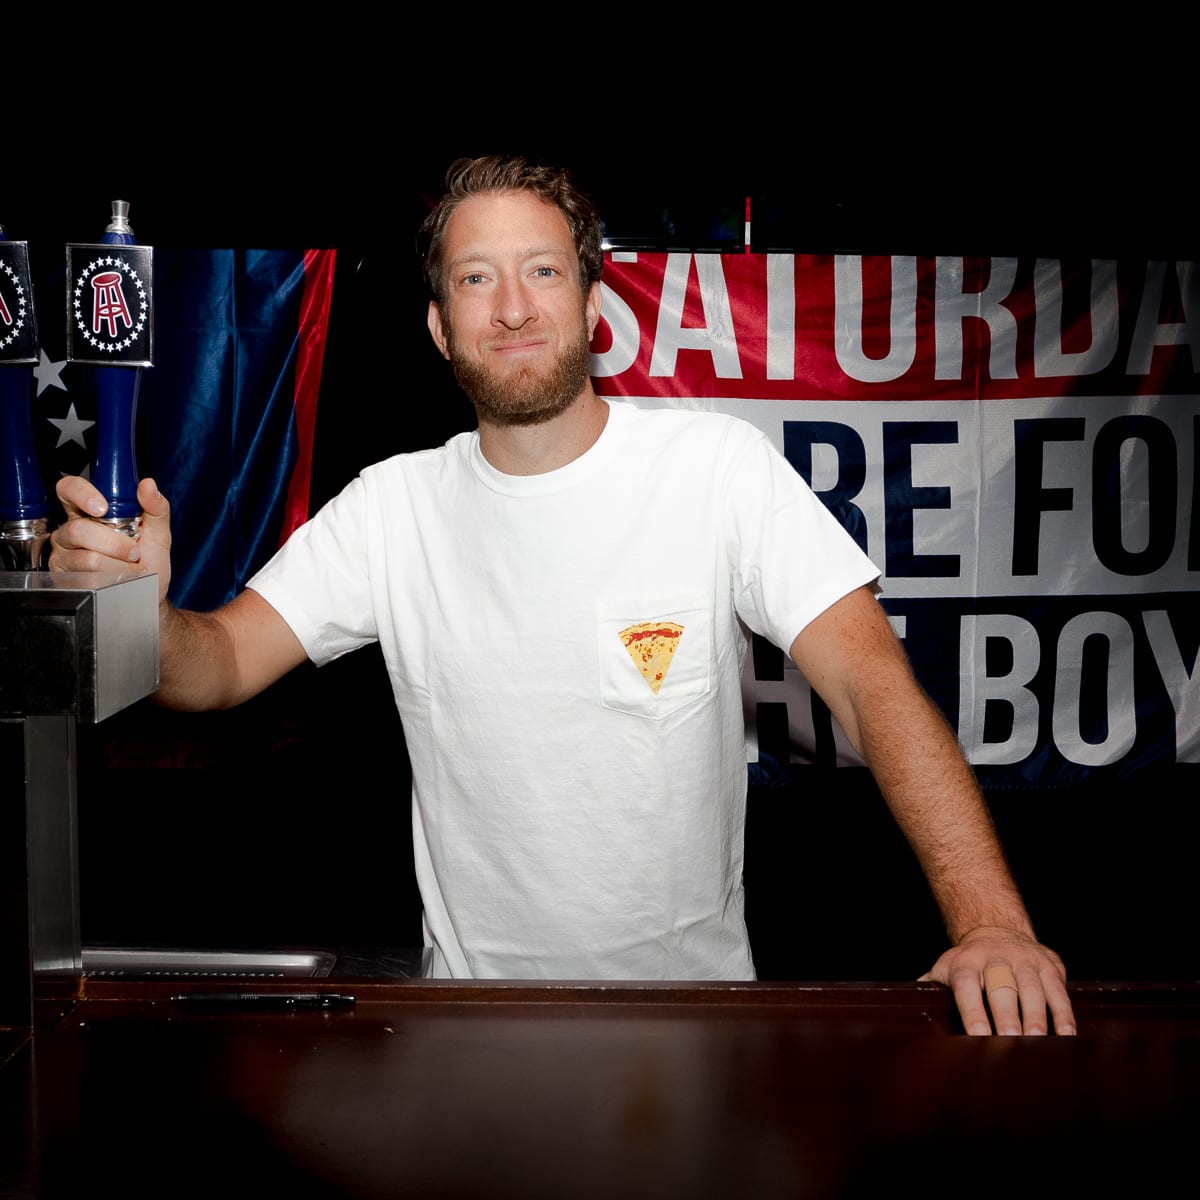 Shirt of the Month Club  Barstool Store – Barstool Sports